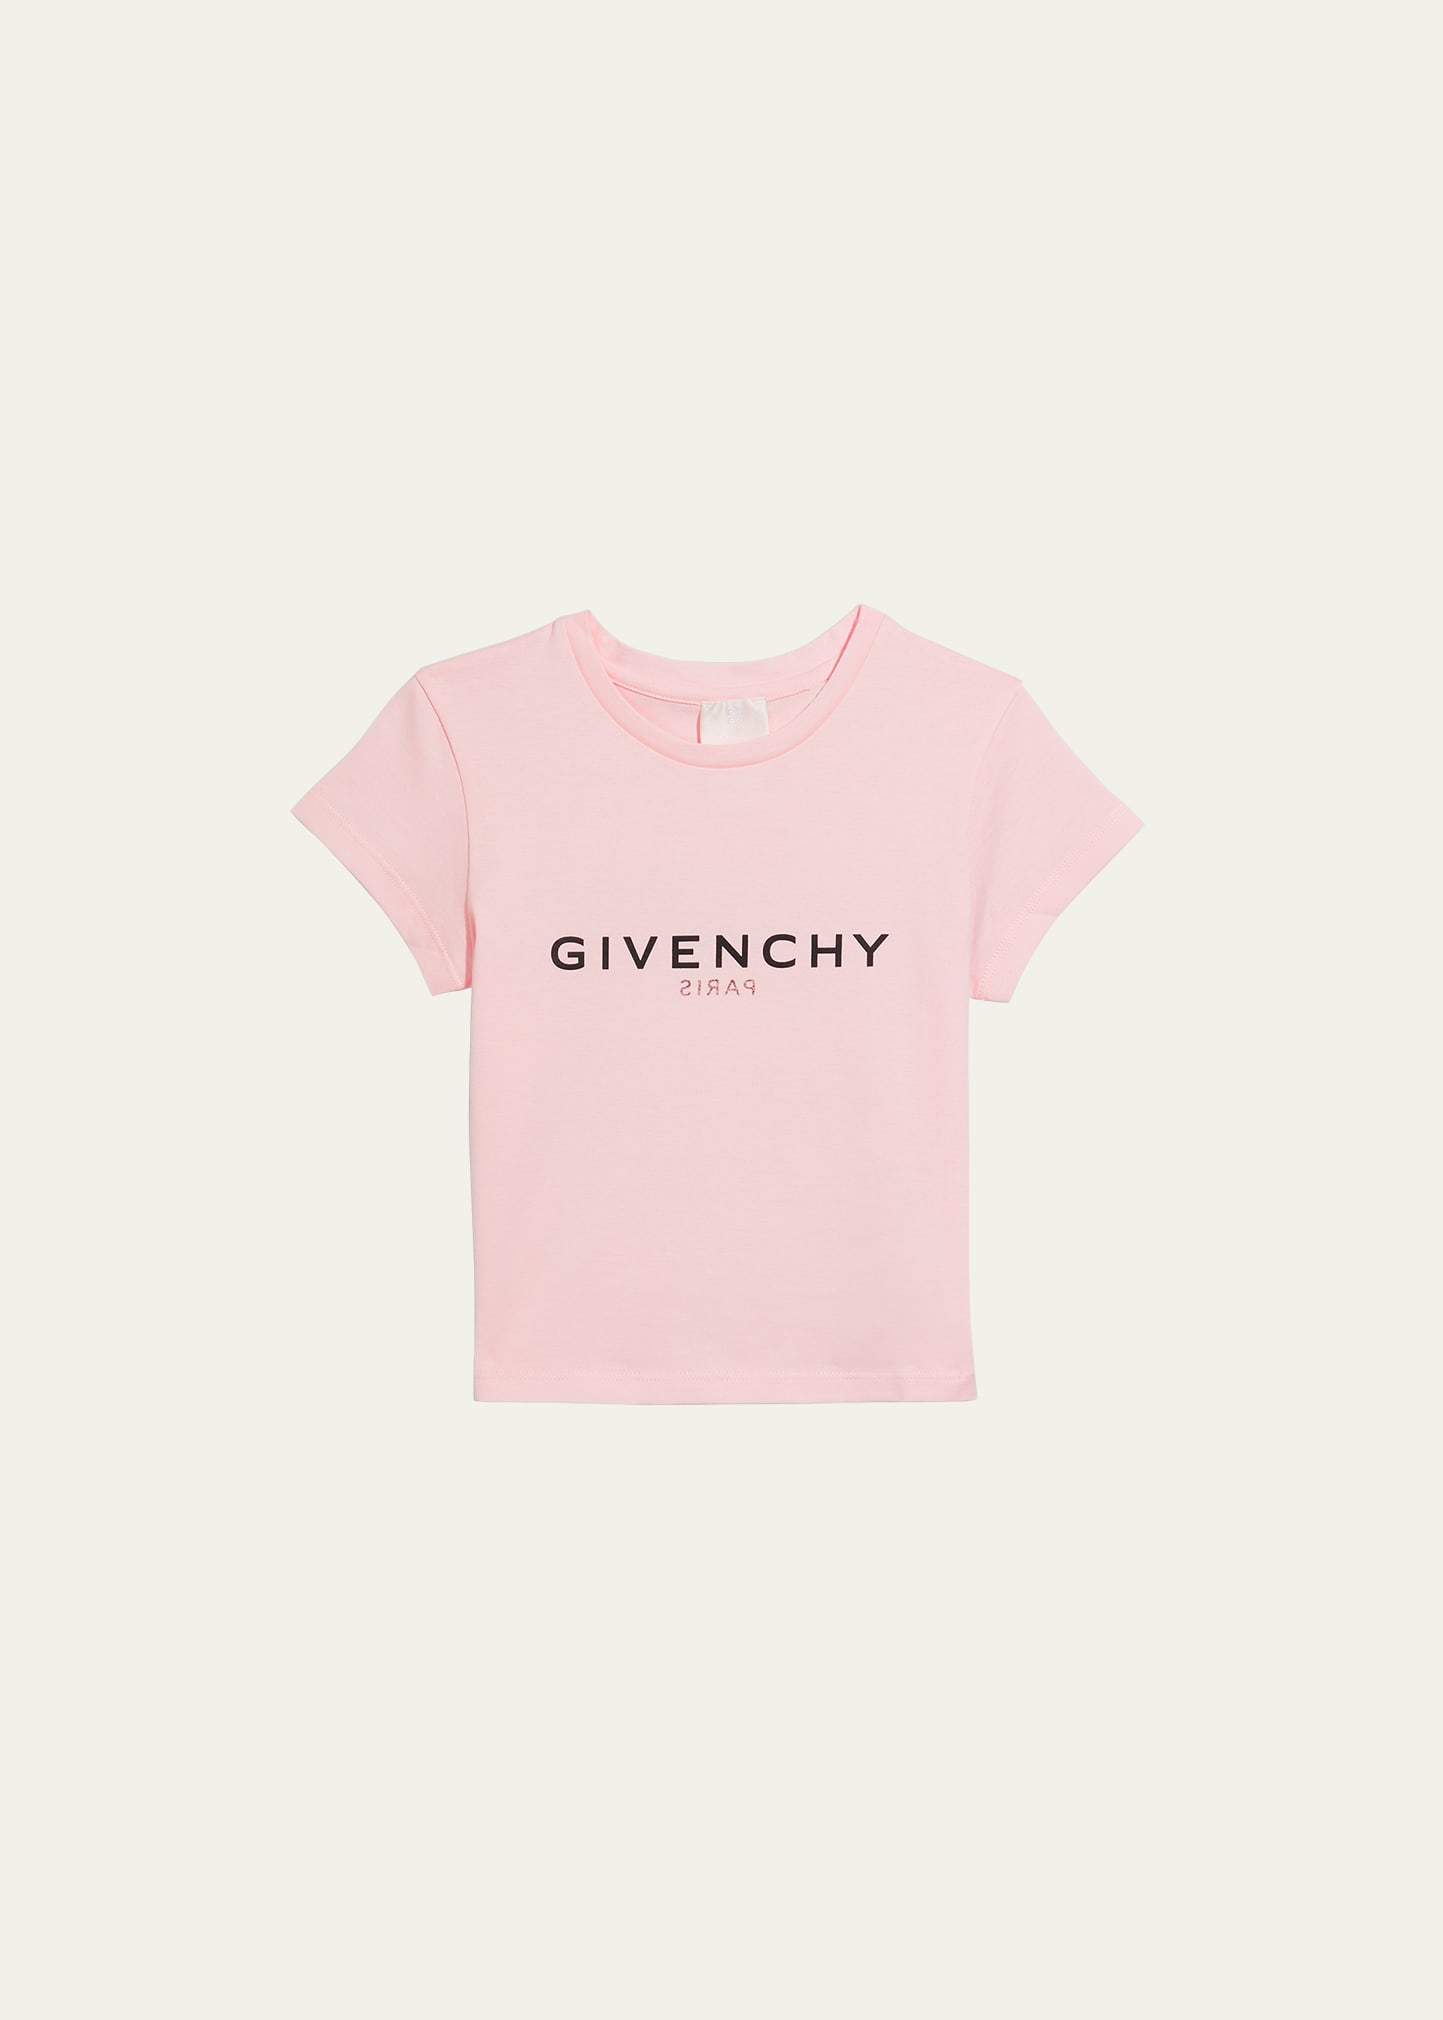 GIVENCHY GIRL'S SHORT-SLEEVE T-SHIRT WITH MIRRORED BACK LOGO